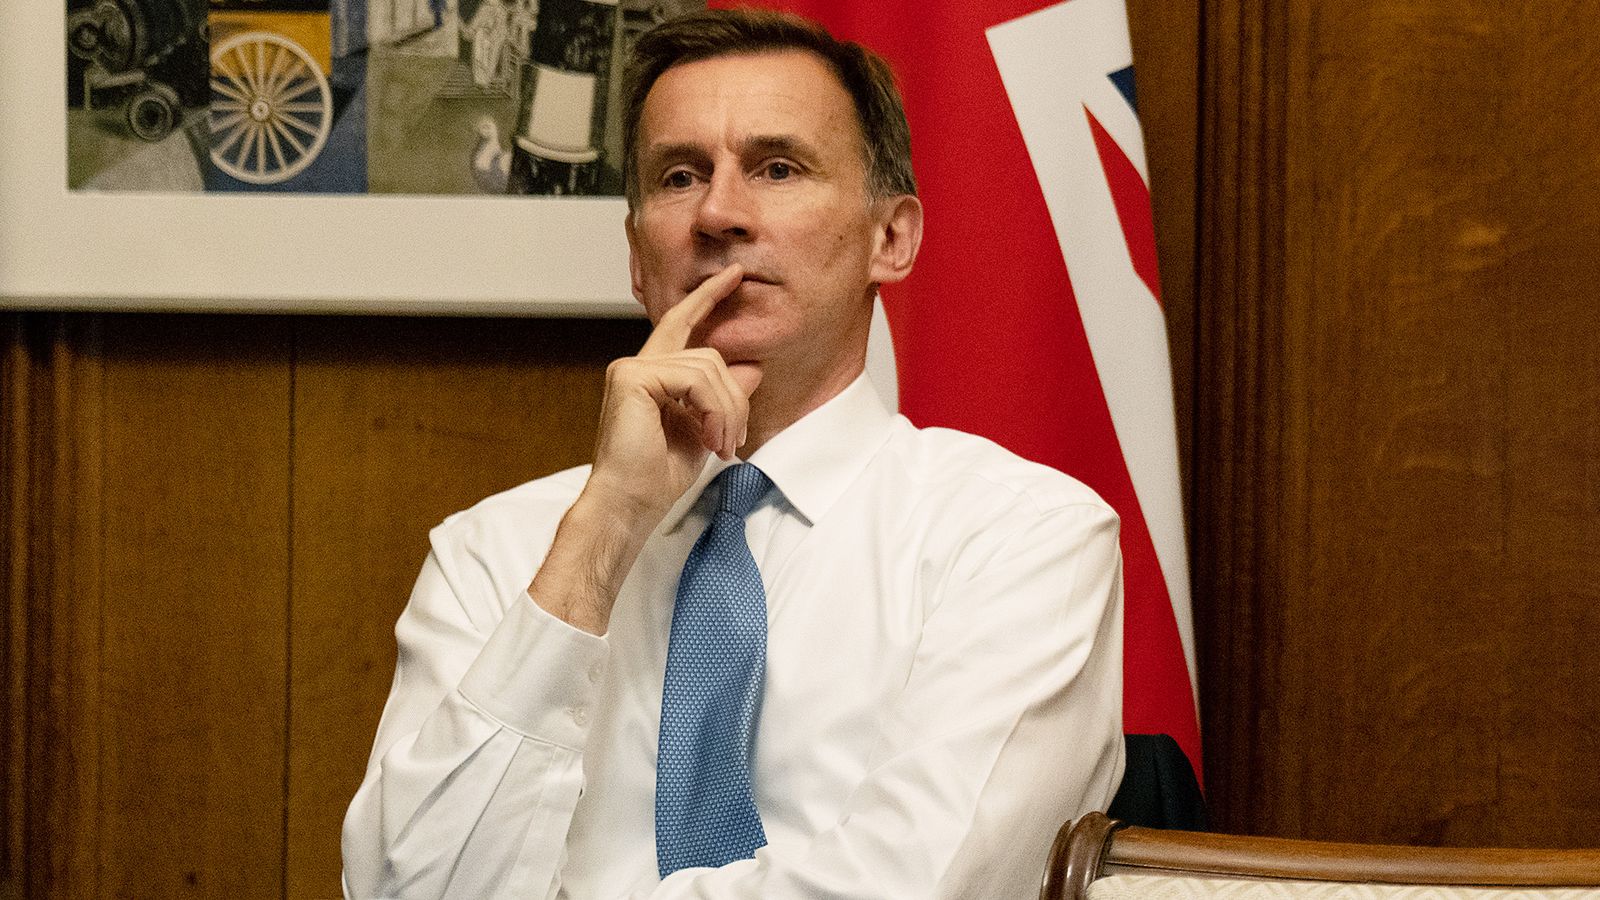 Jeremy Hunt denies being source behind story about ministers considering a Swiss-style Brexit deal that 'set hares running'